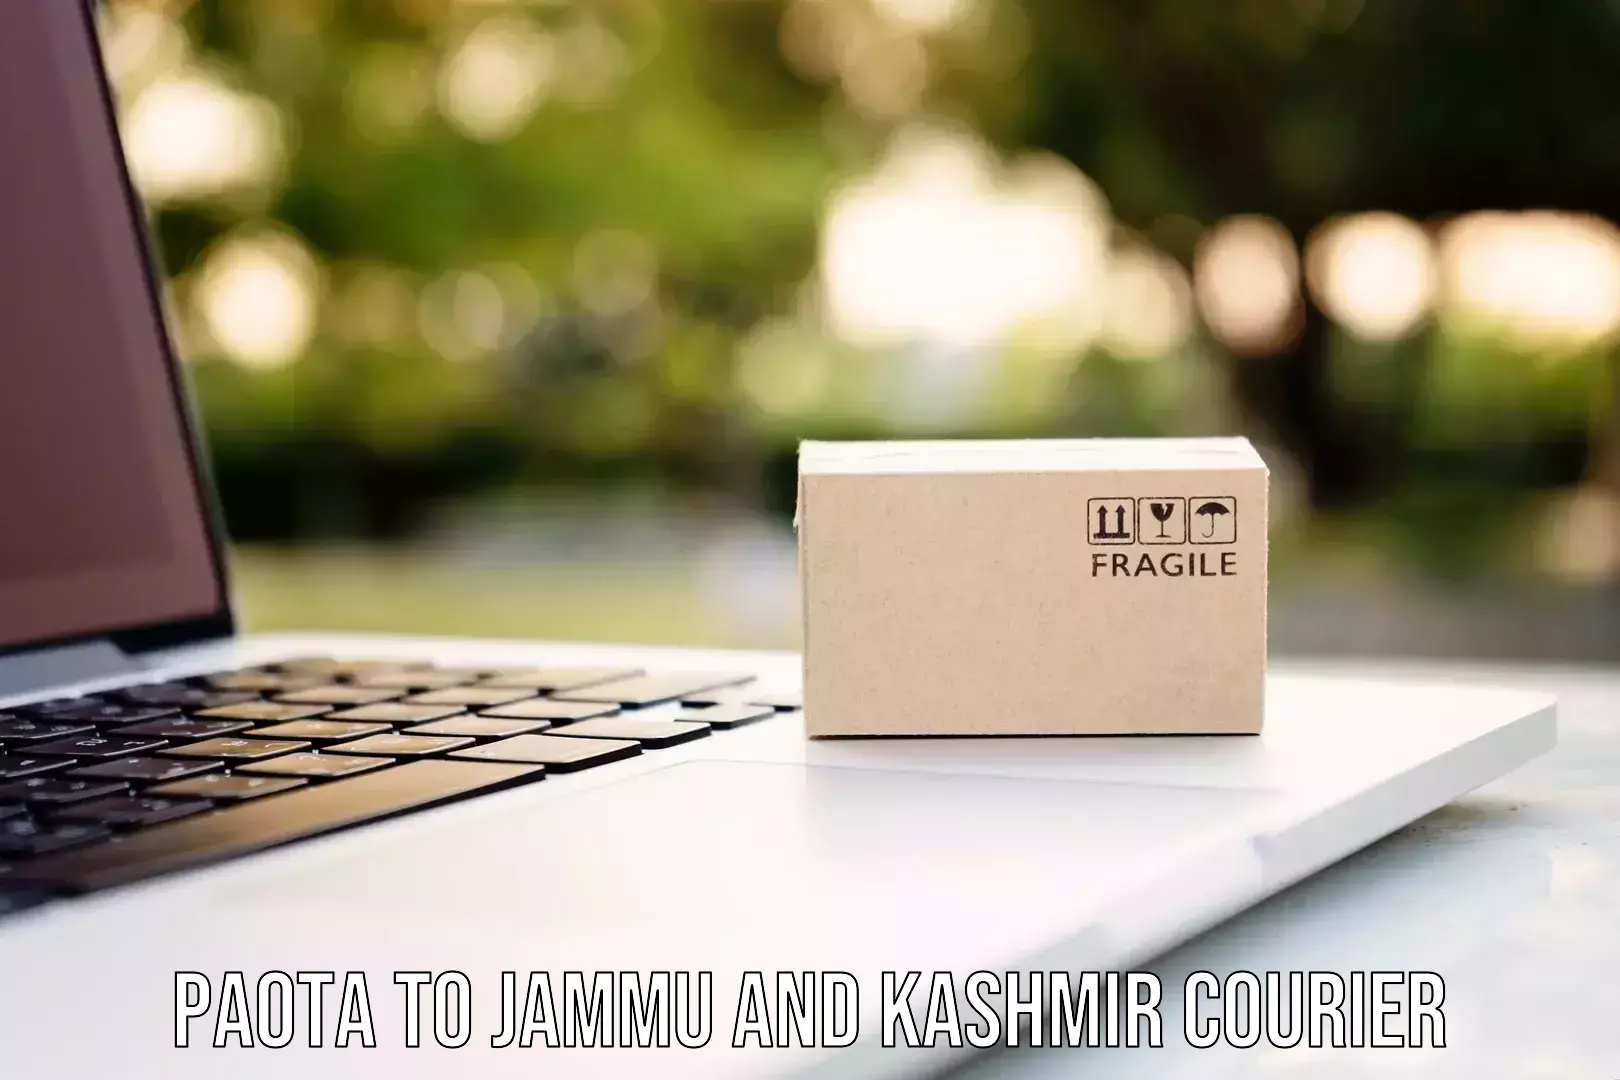 Quality courier services Paota to Jammu and Kashmir